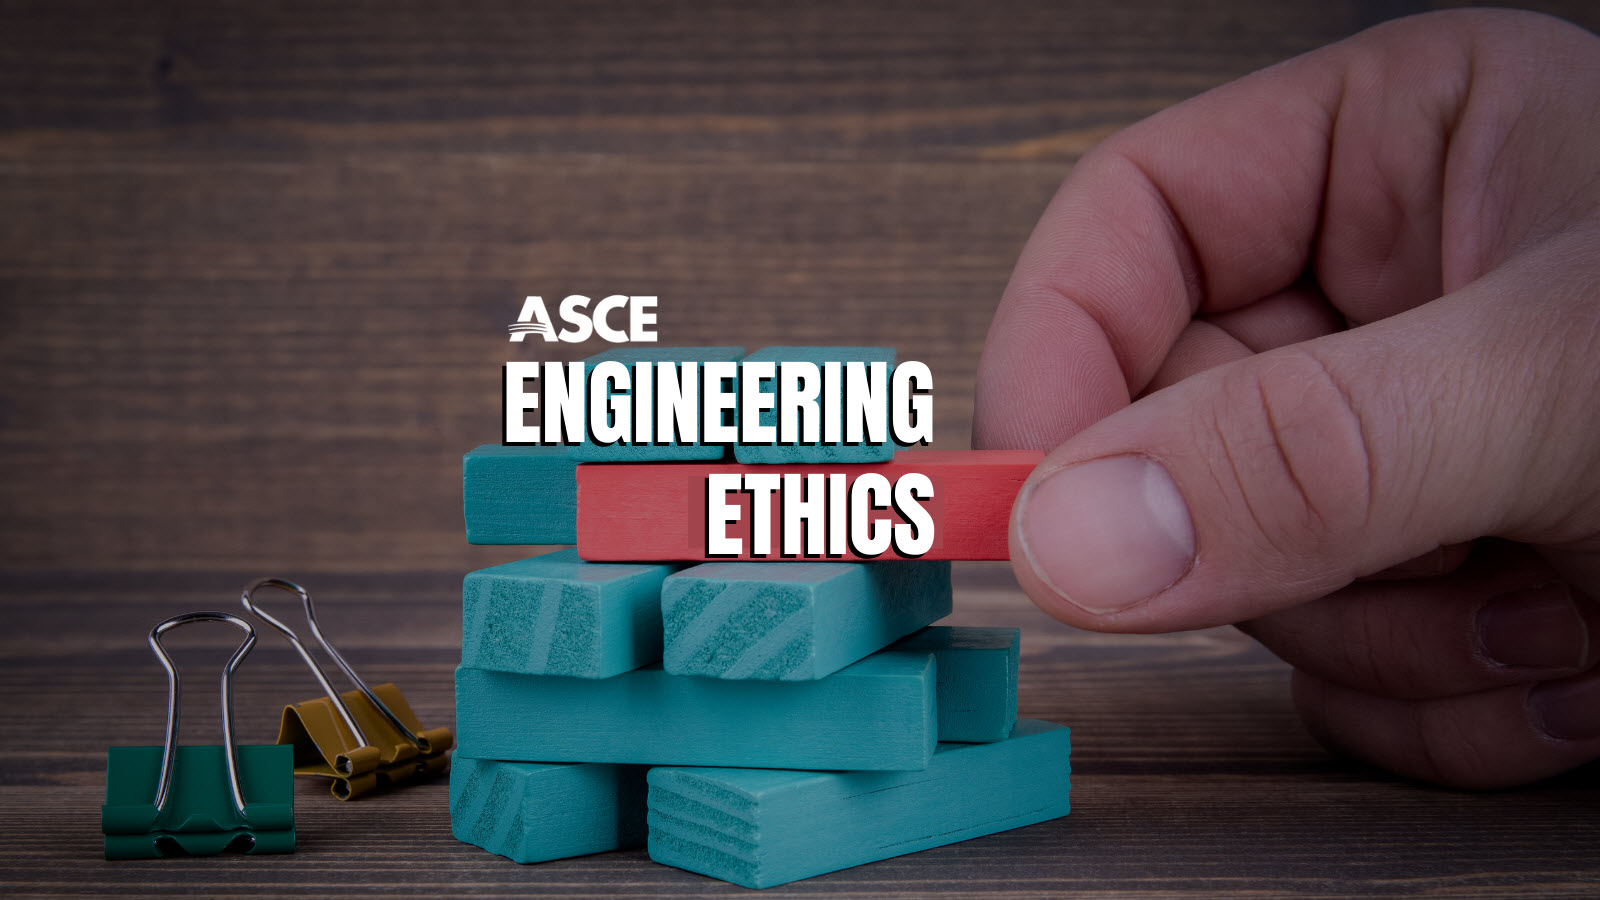 Engineering Ethics: Public health, safety, and welfare